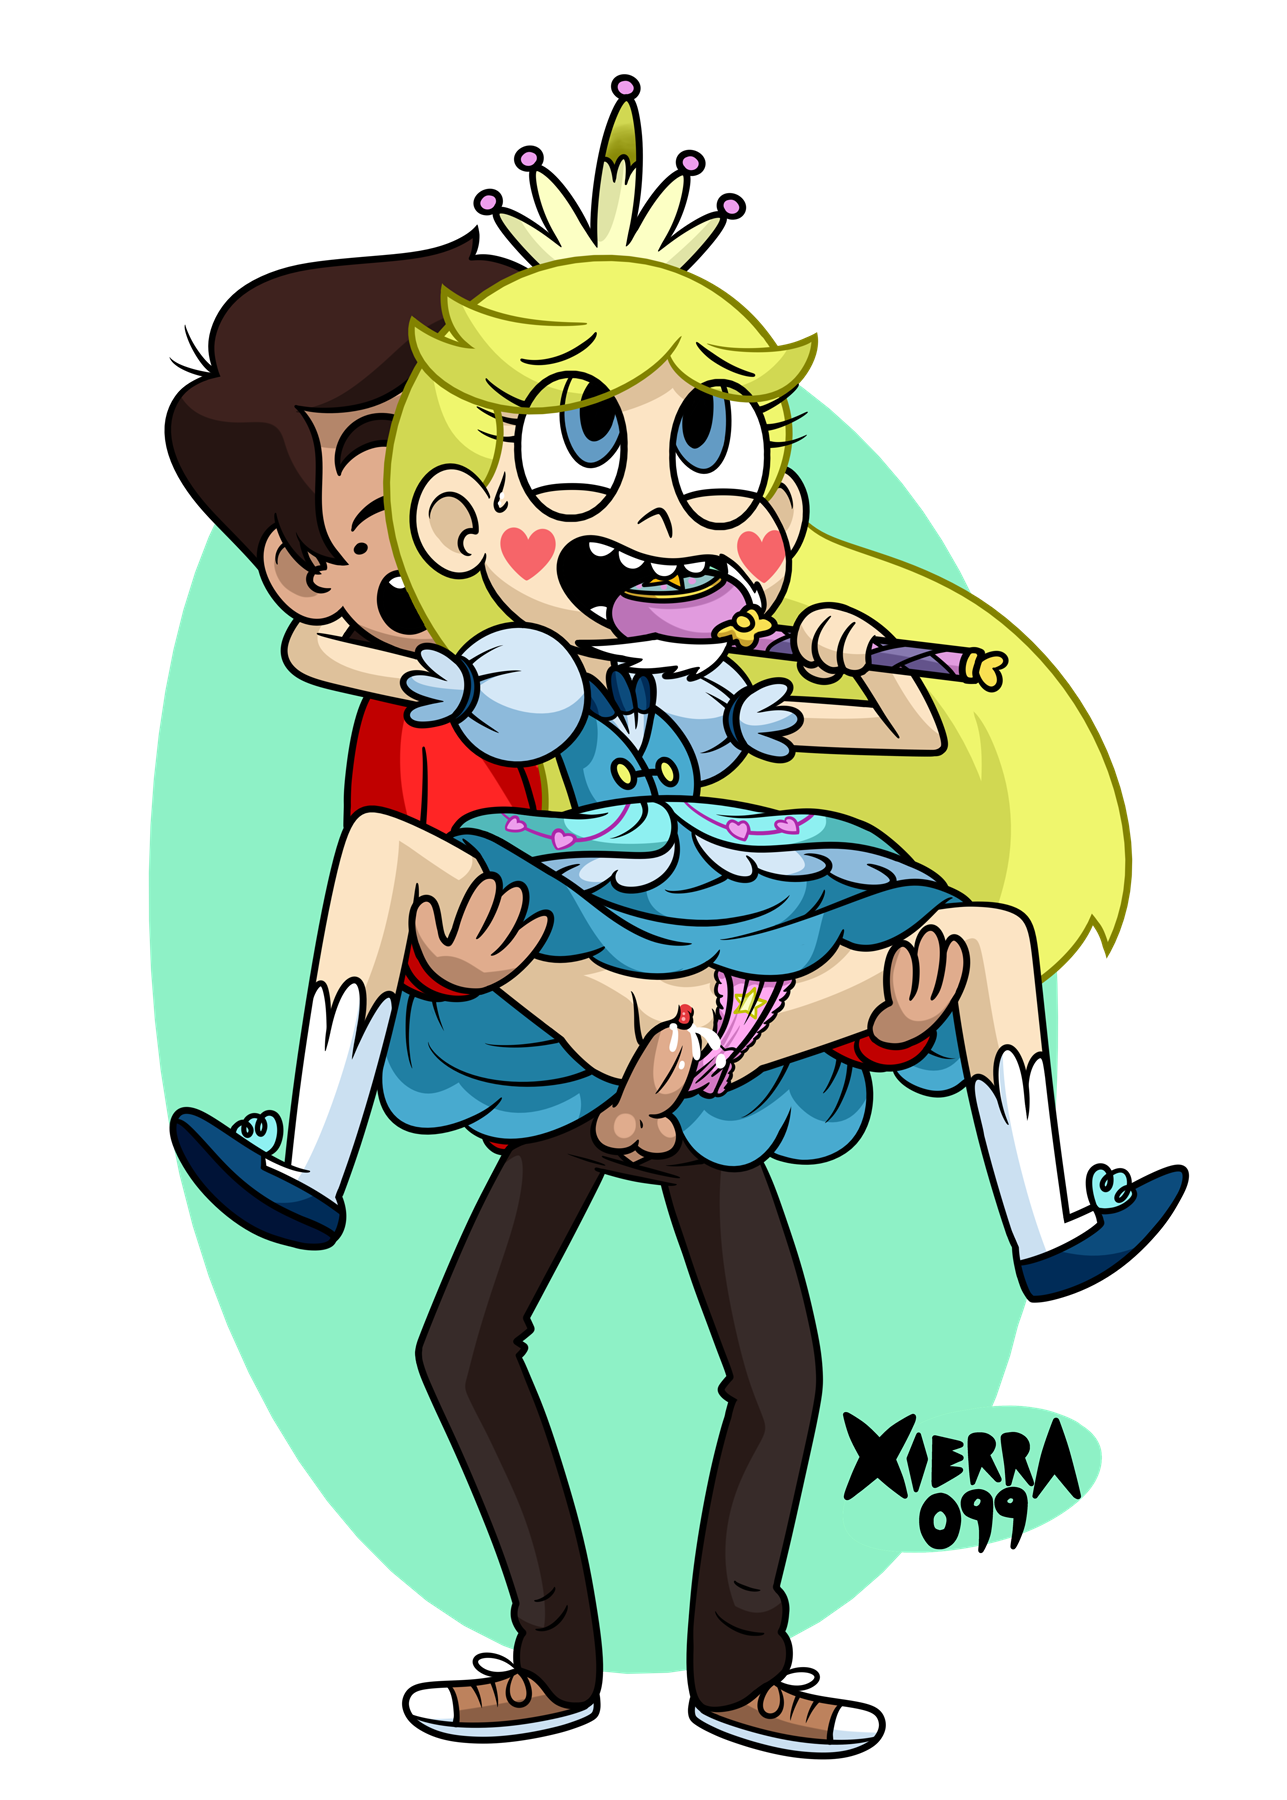 2157411_-_marco_diaz_star_butterfly_star_vs_the_forces_of_evil_xierra099